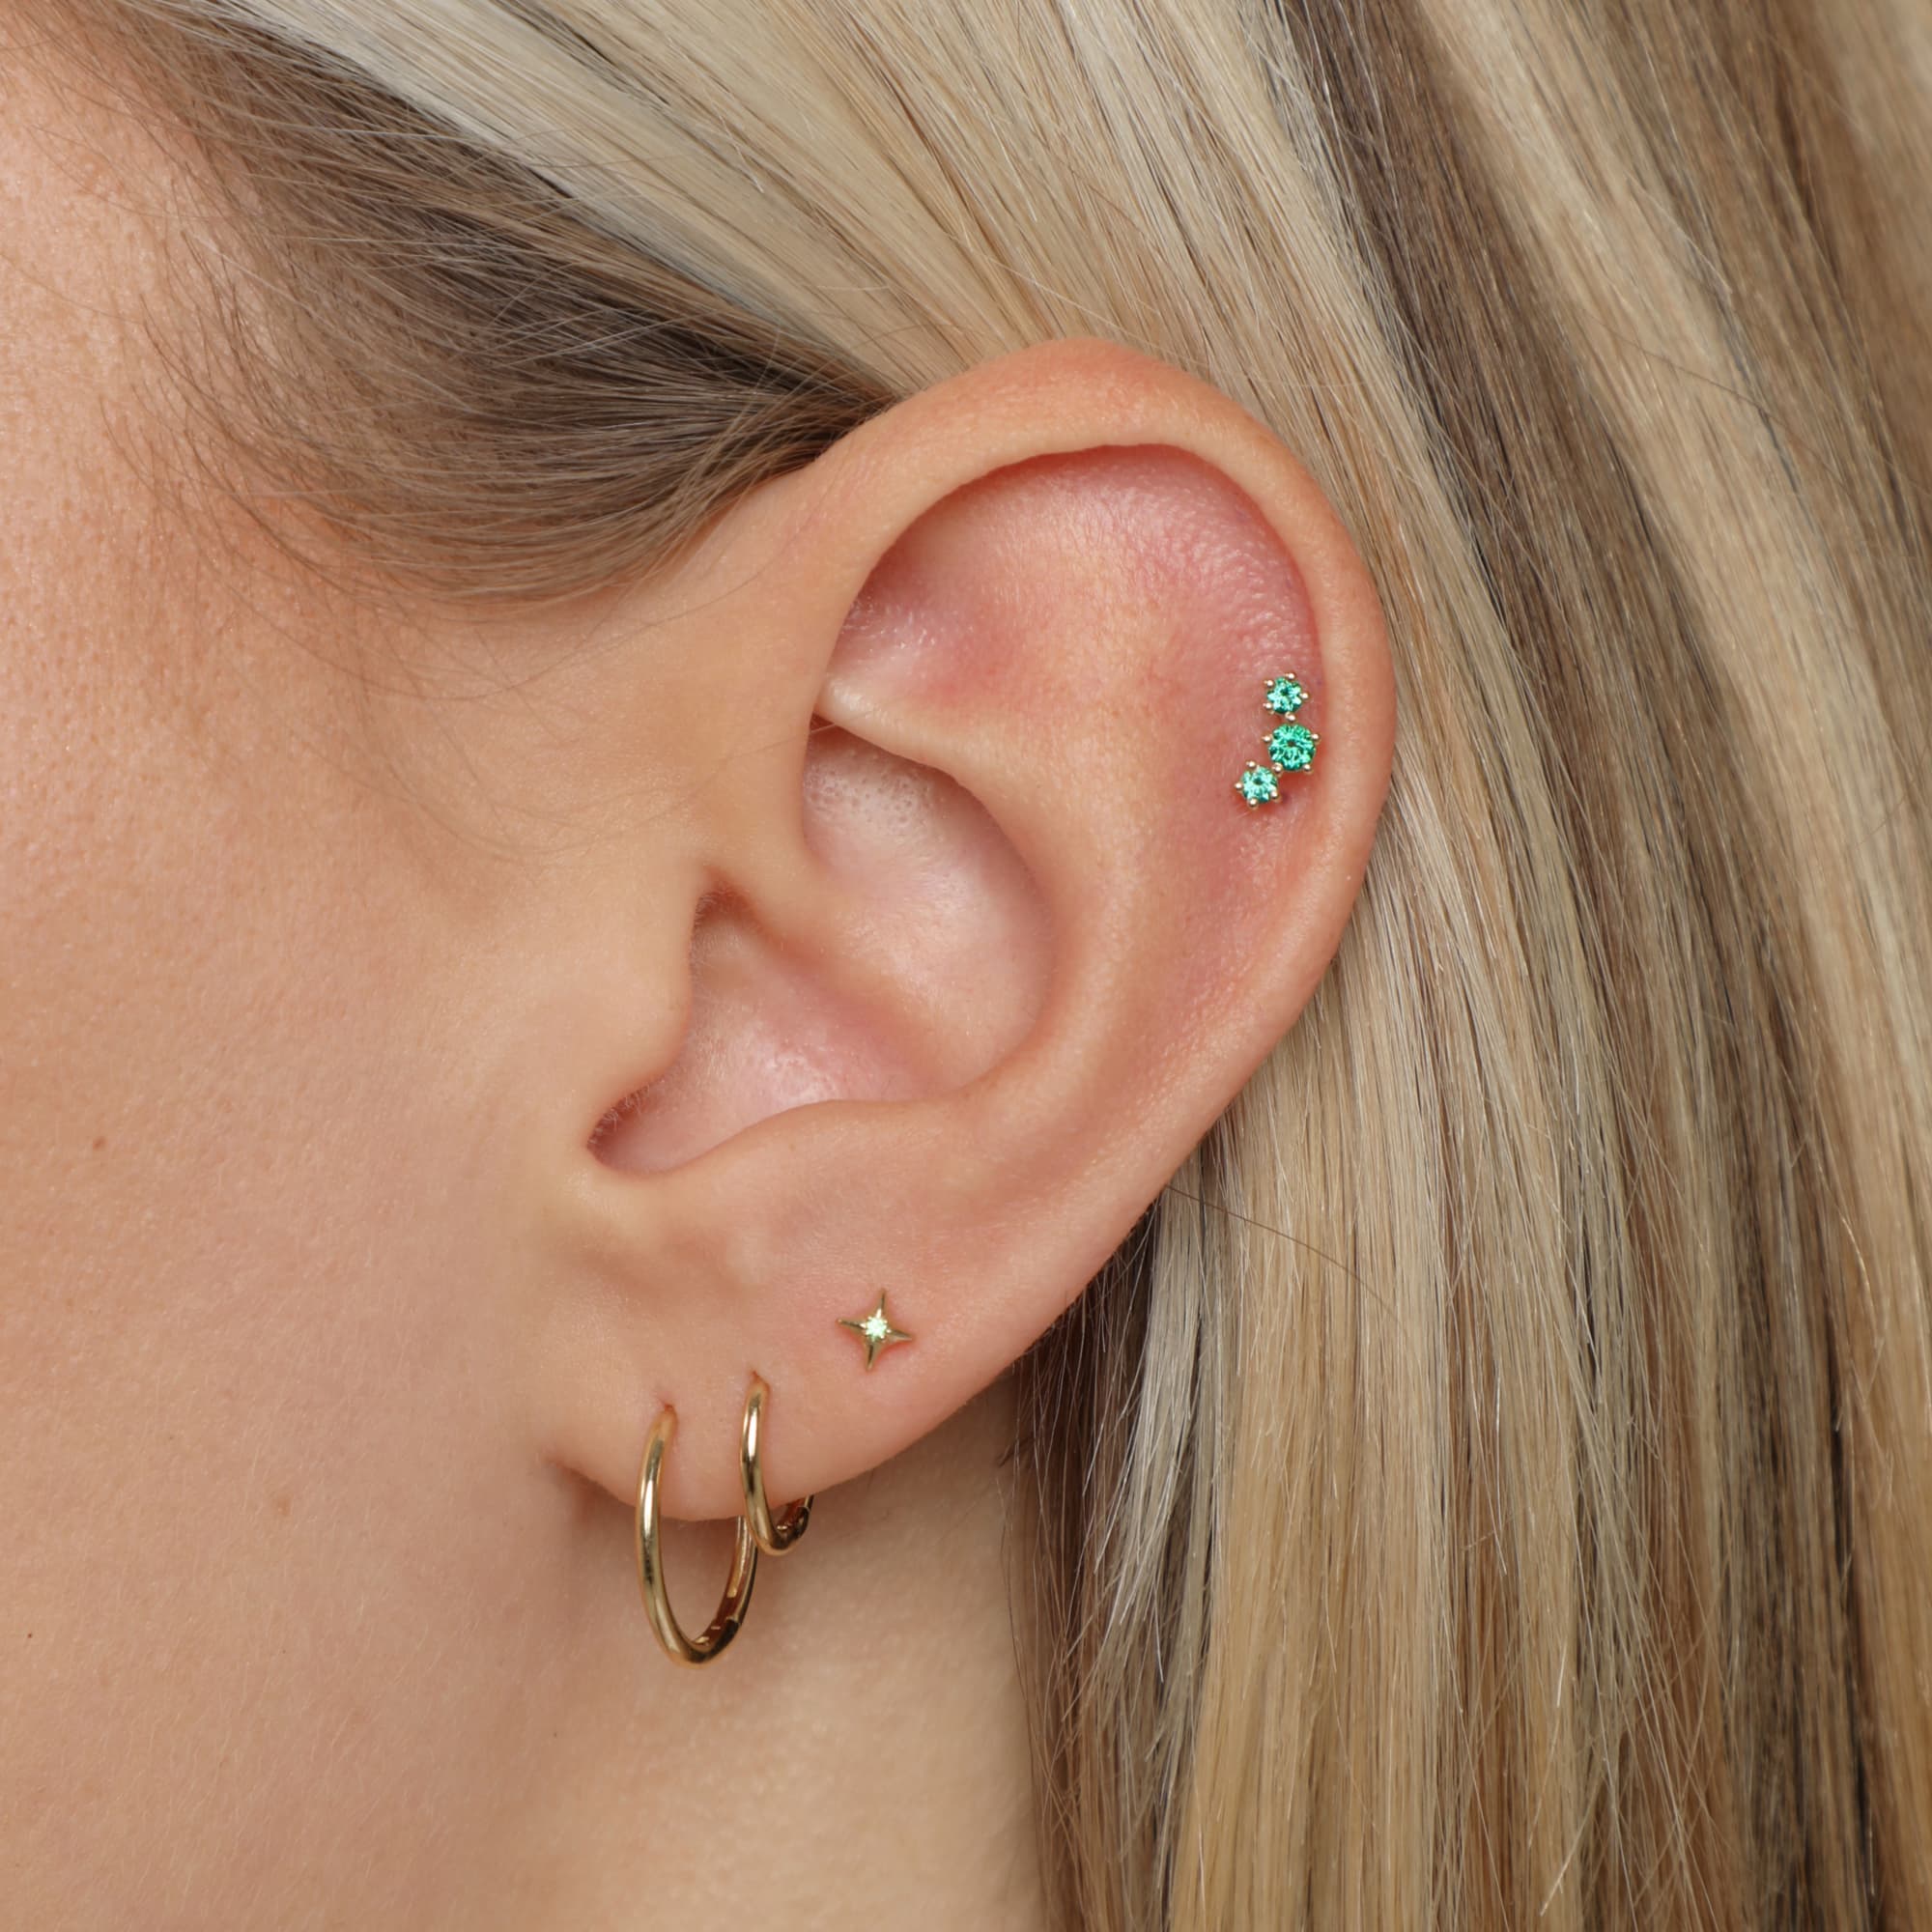 How to Layer Earrings (and how not to!) - The Small Things Blog